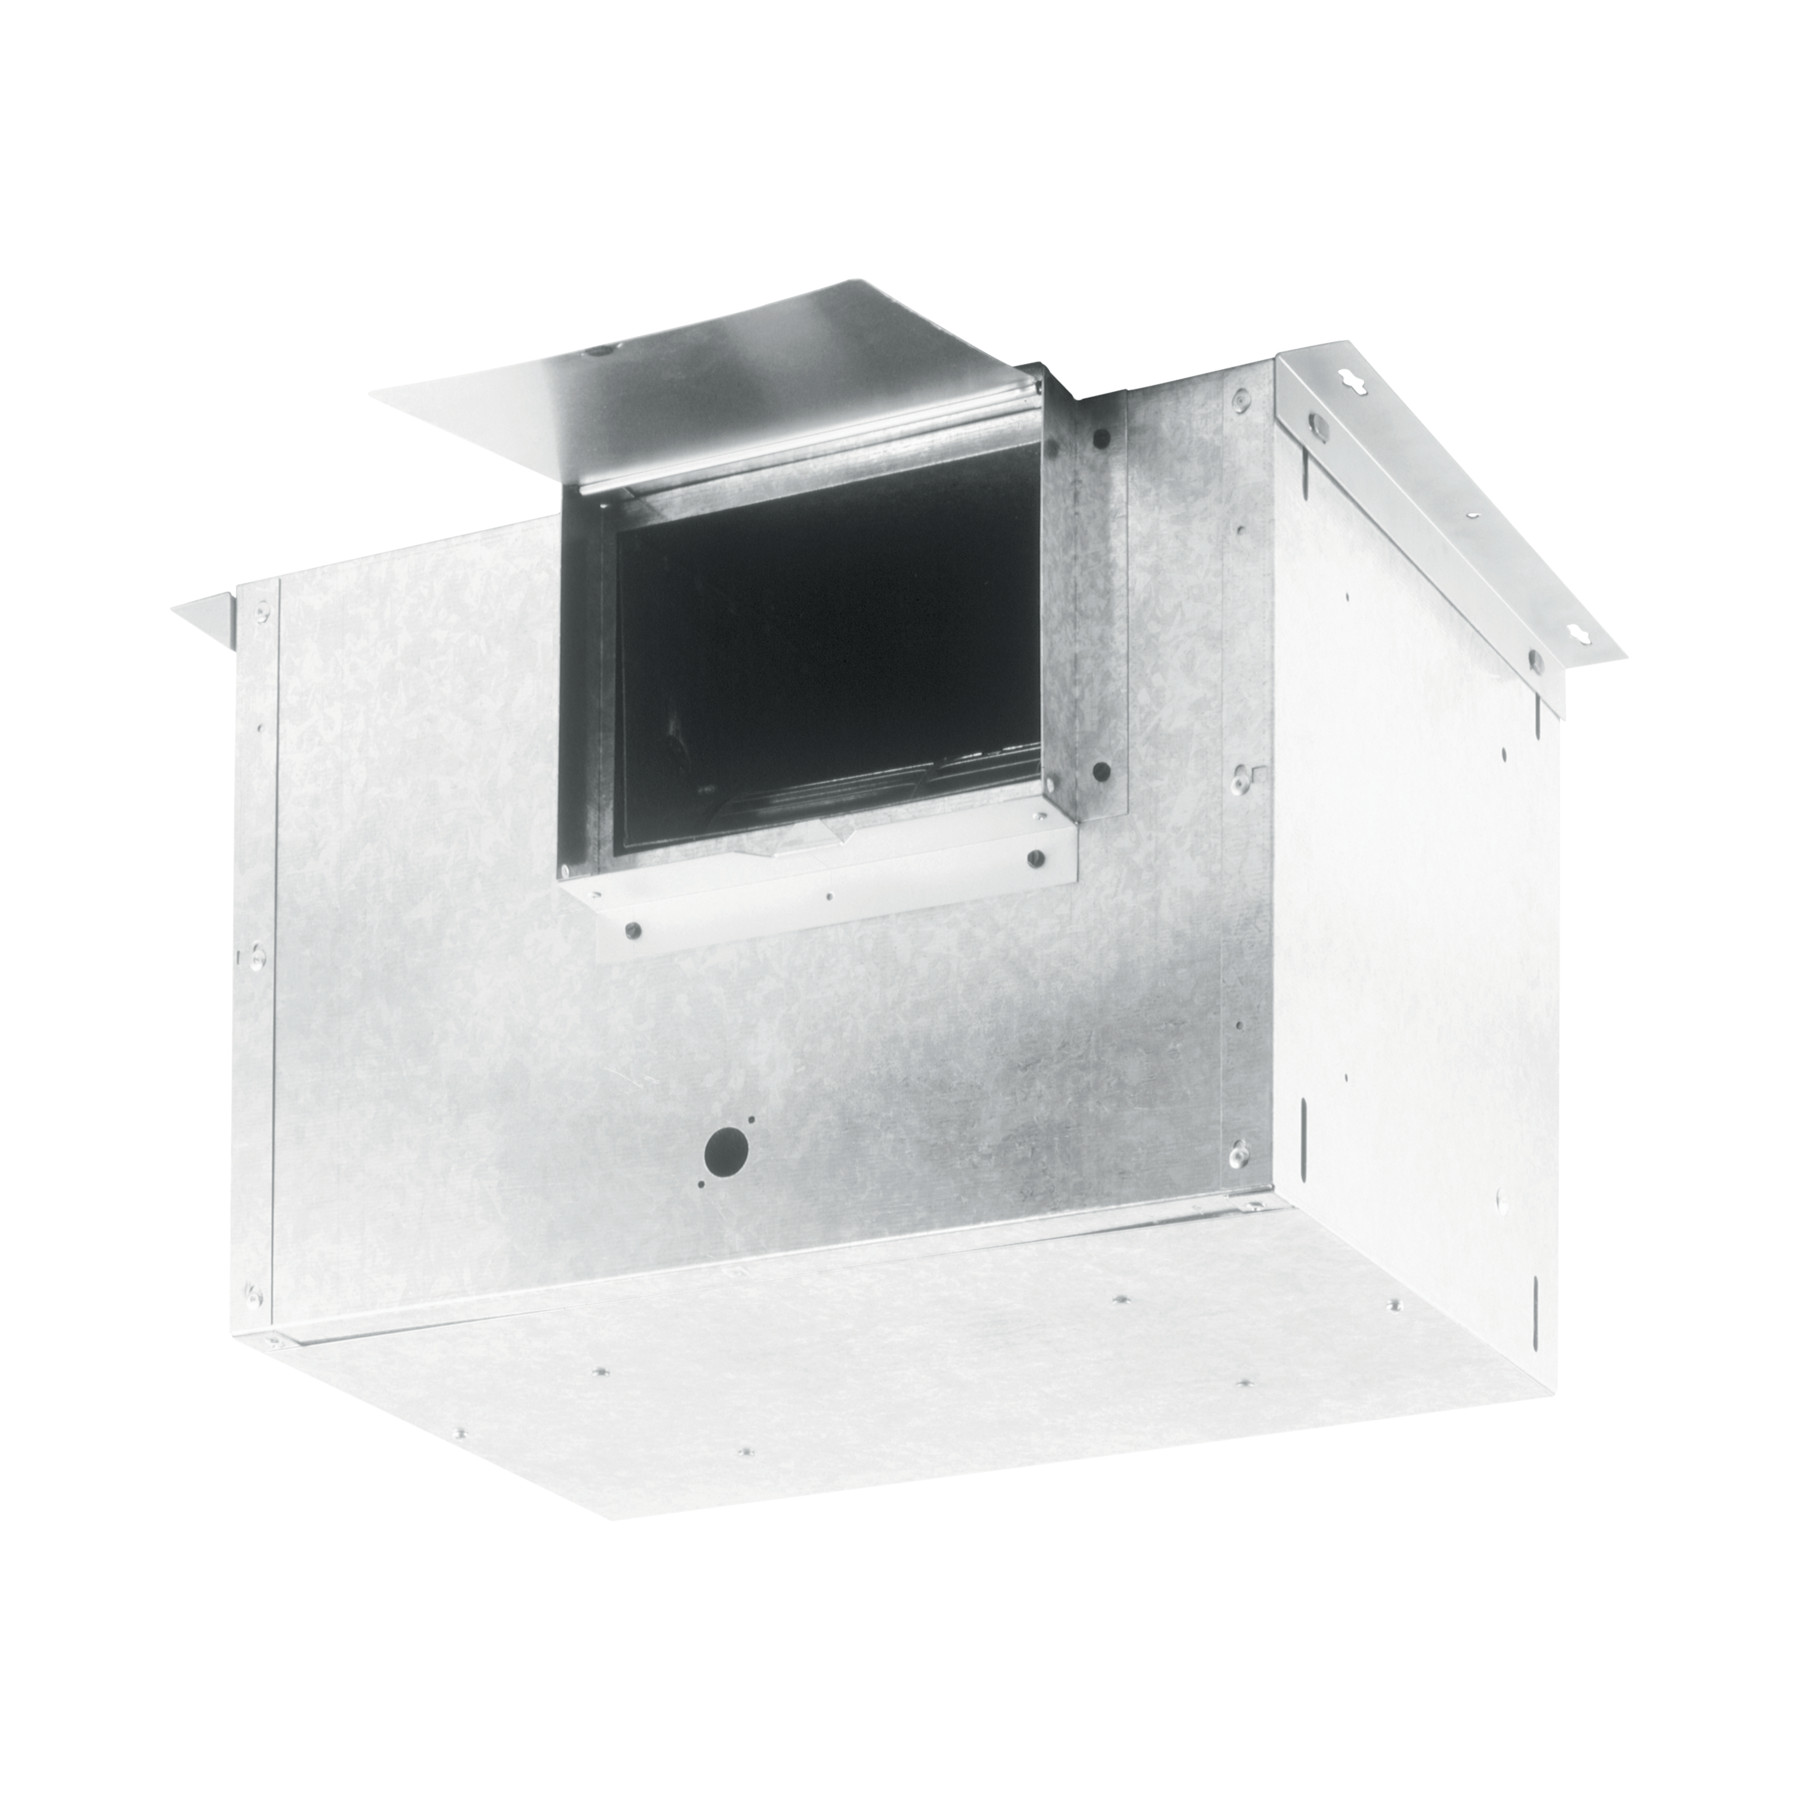 **DISCONTINUED** Broan® LOSONE SELECT™ Ventilation Fan; 894 CFM Straight Through, 3.8 Sones; 858 CFM Right Angle